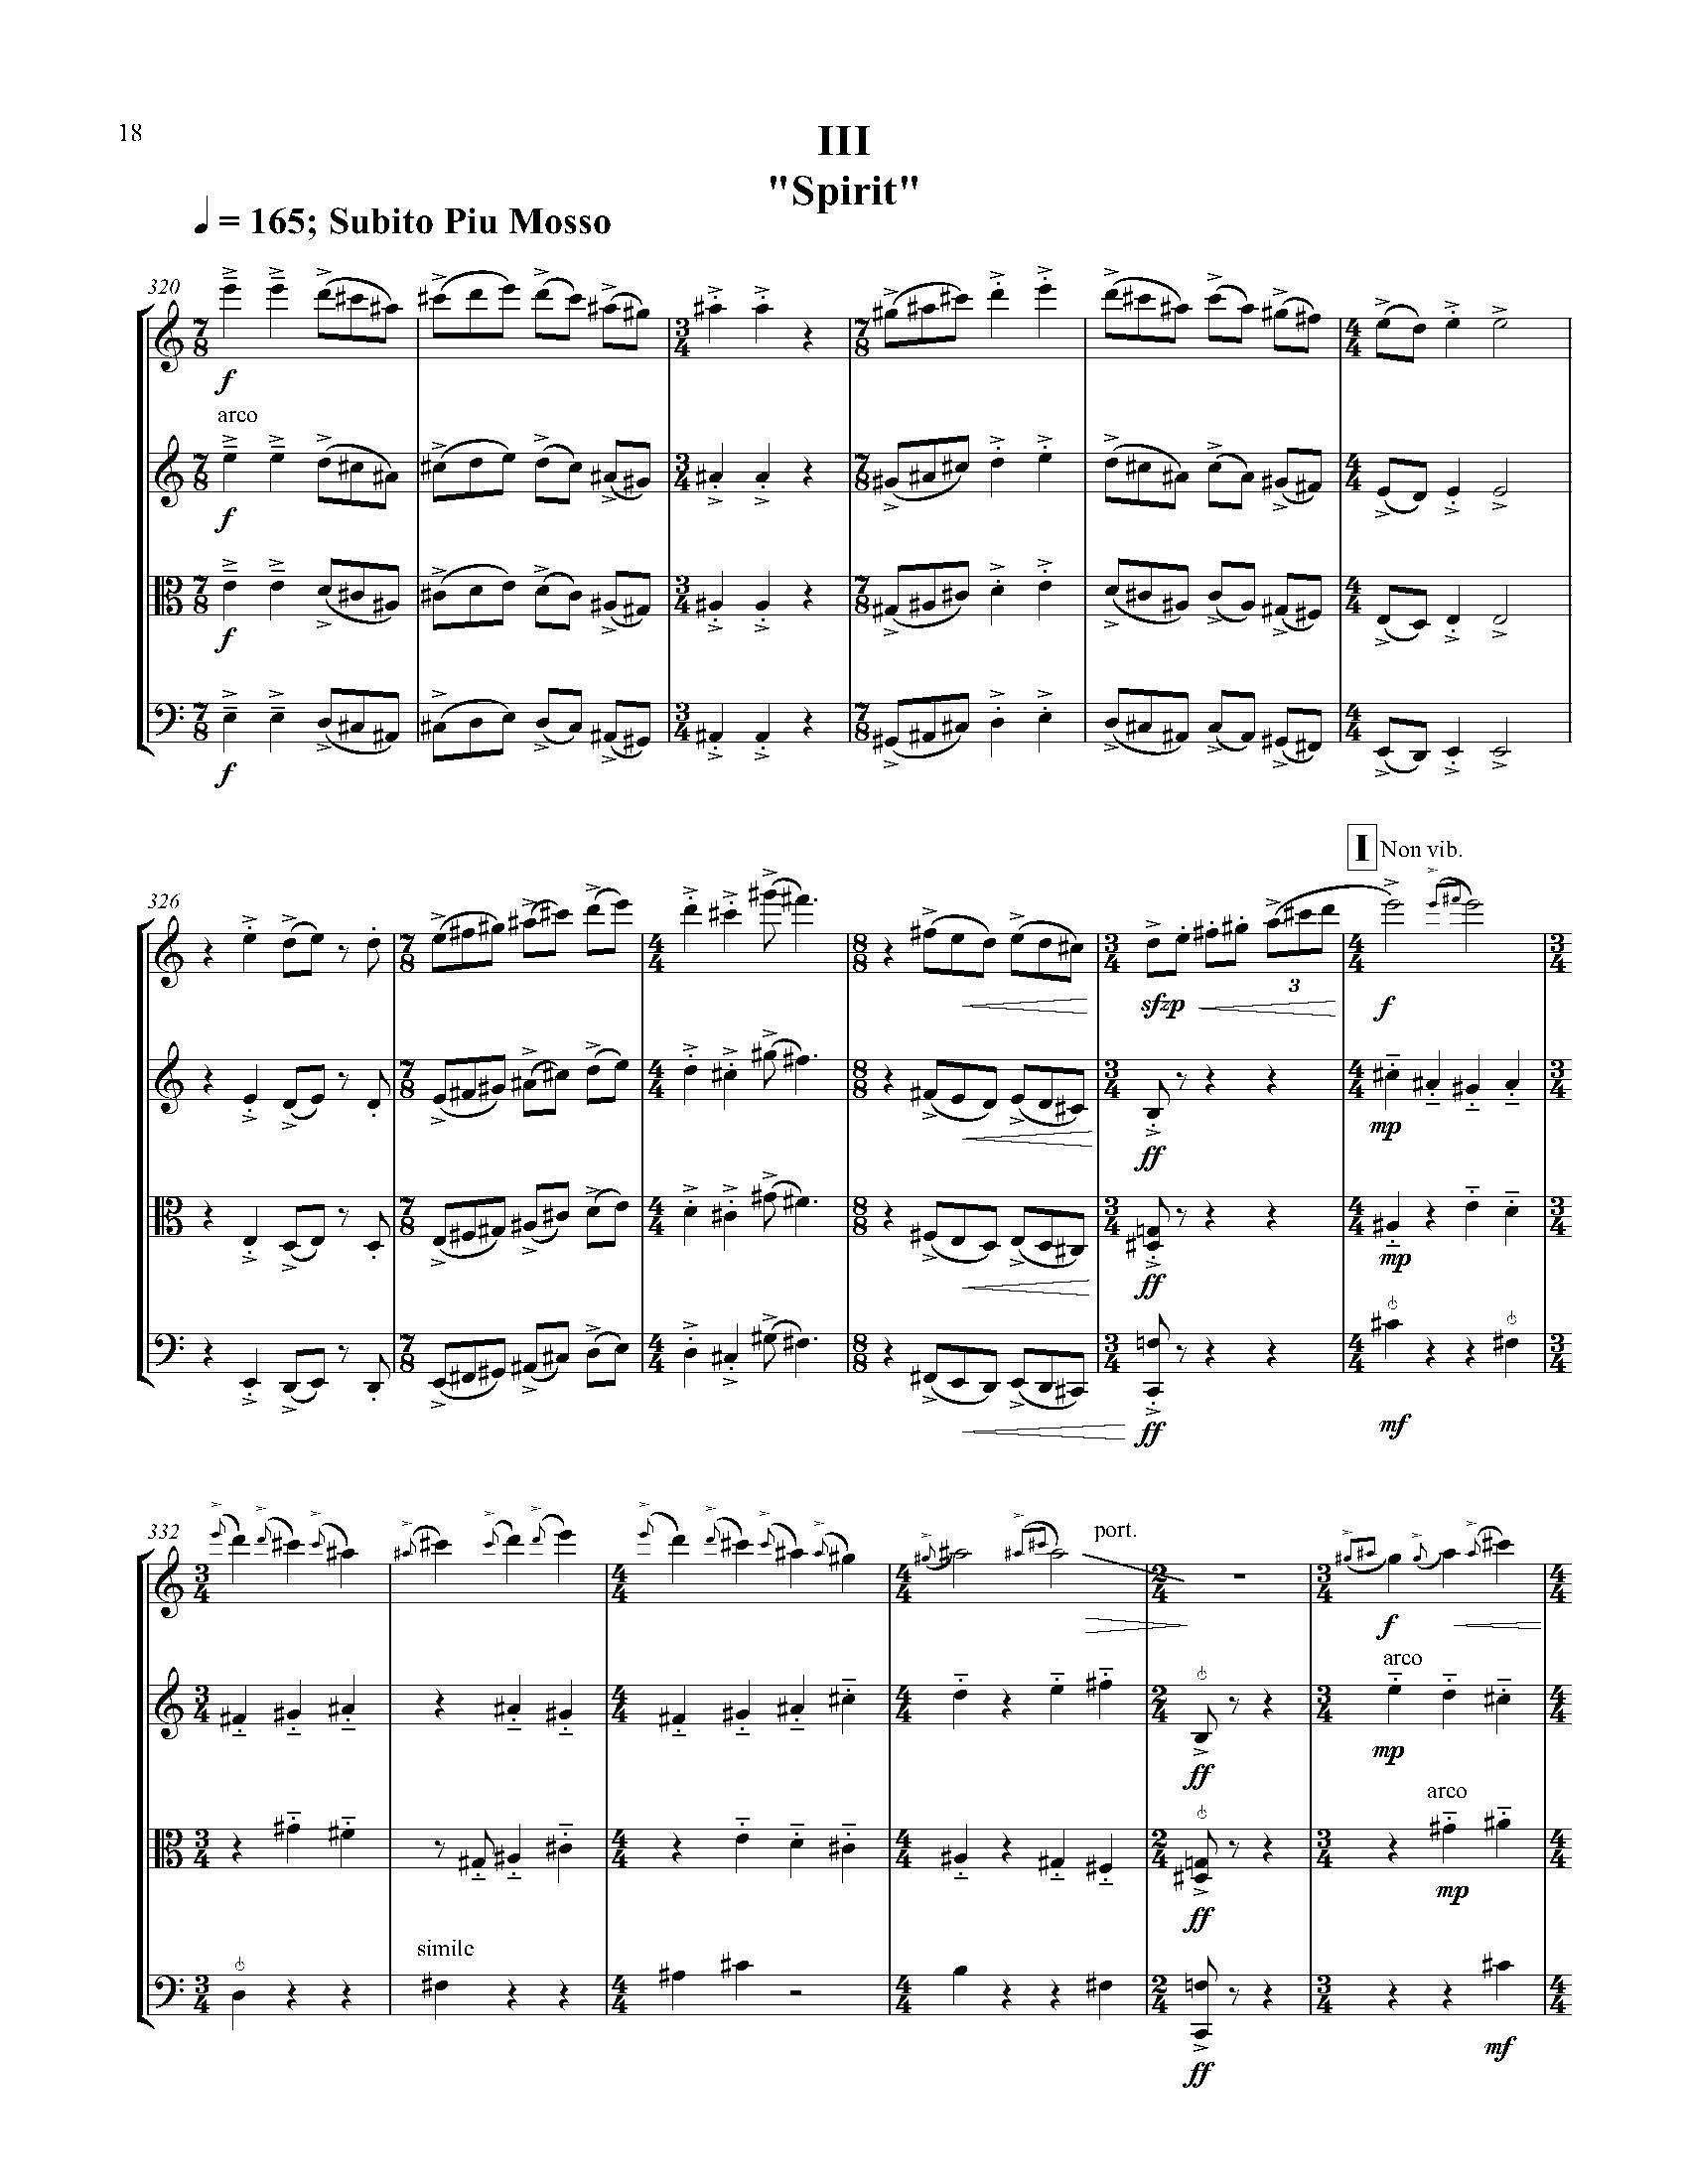 A Country of Vast Designs - Complete Score_Page_24.jpg